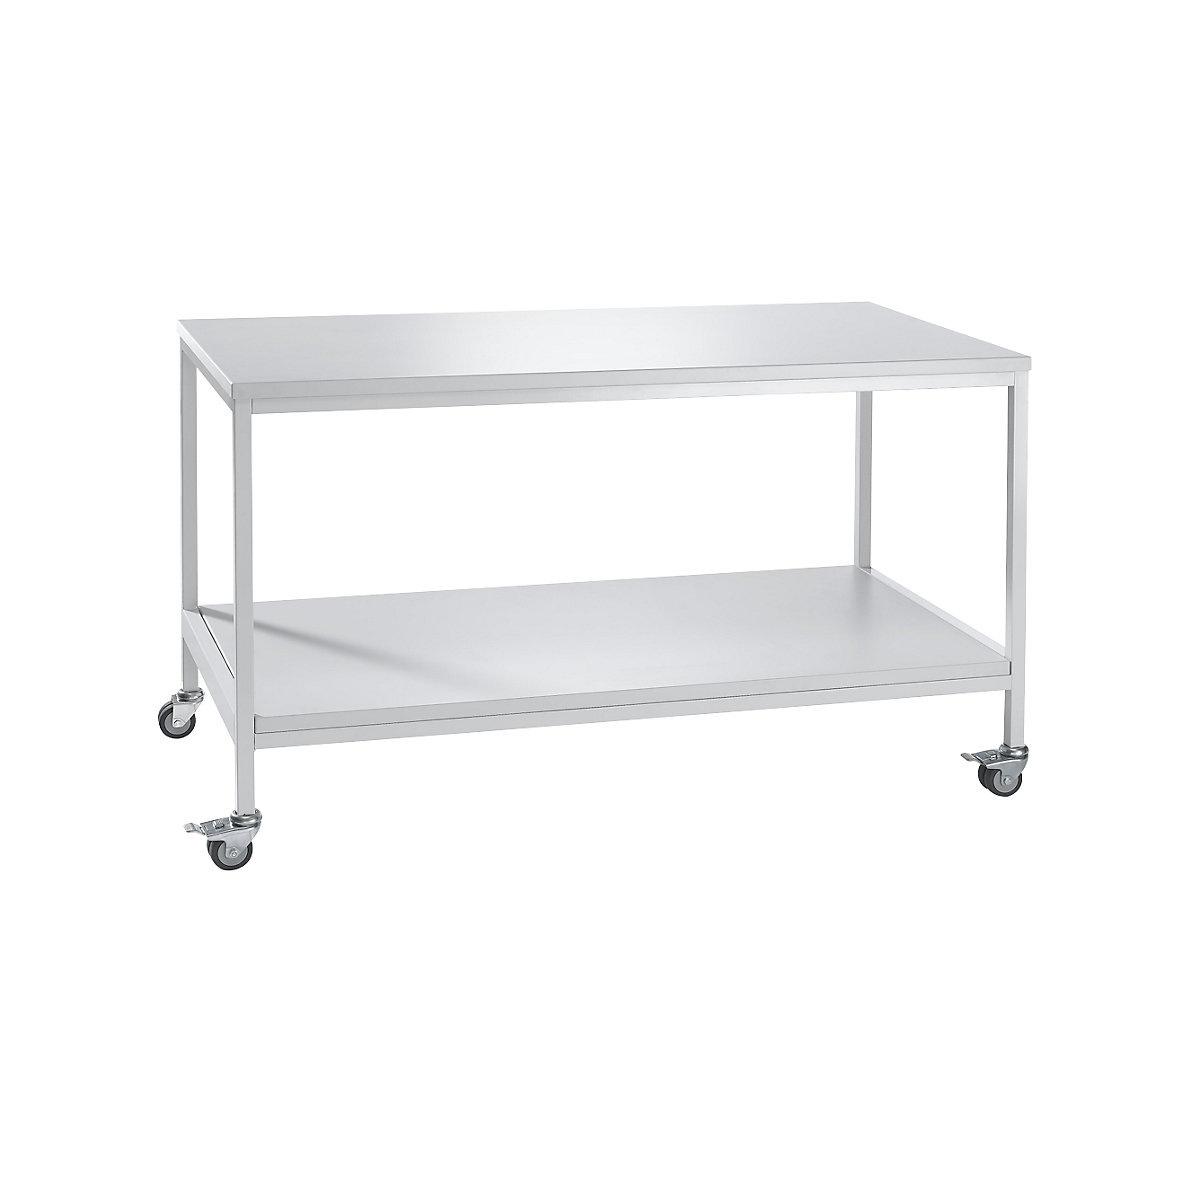 Mobile laboratory table, with shelf, max. load 200 kg, WxDxH 1200 x 750 x 900 mm-2